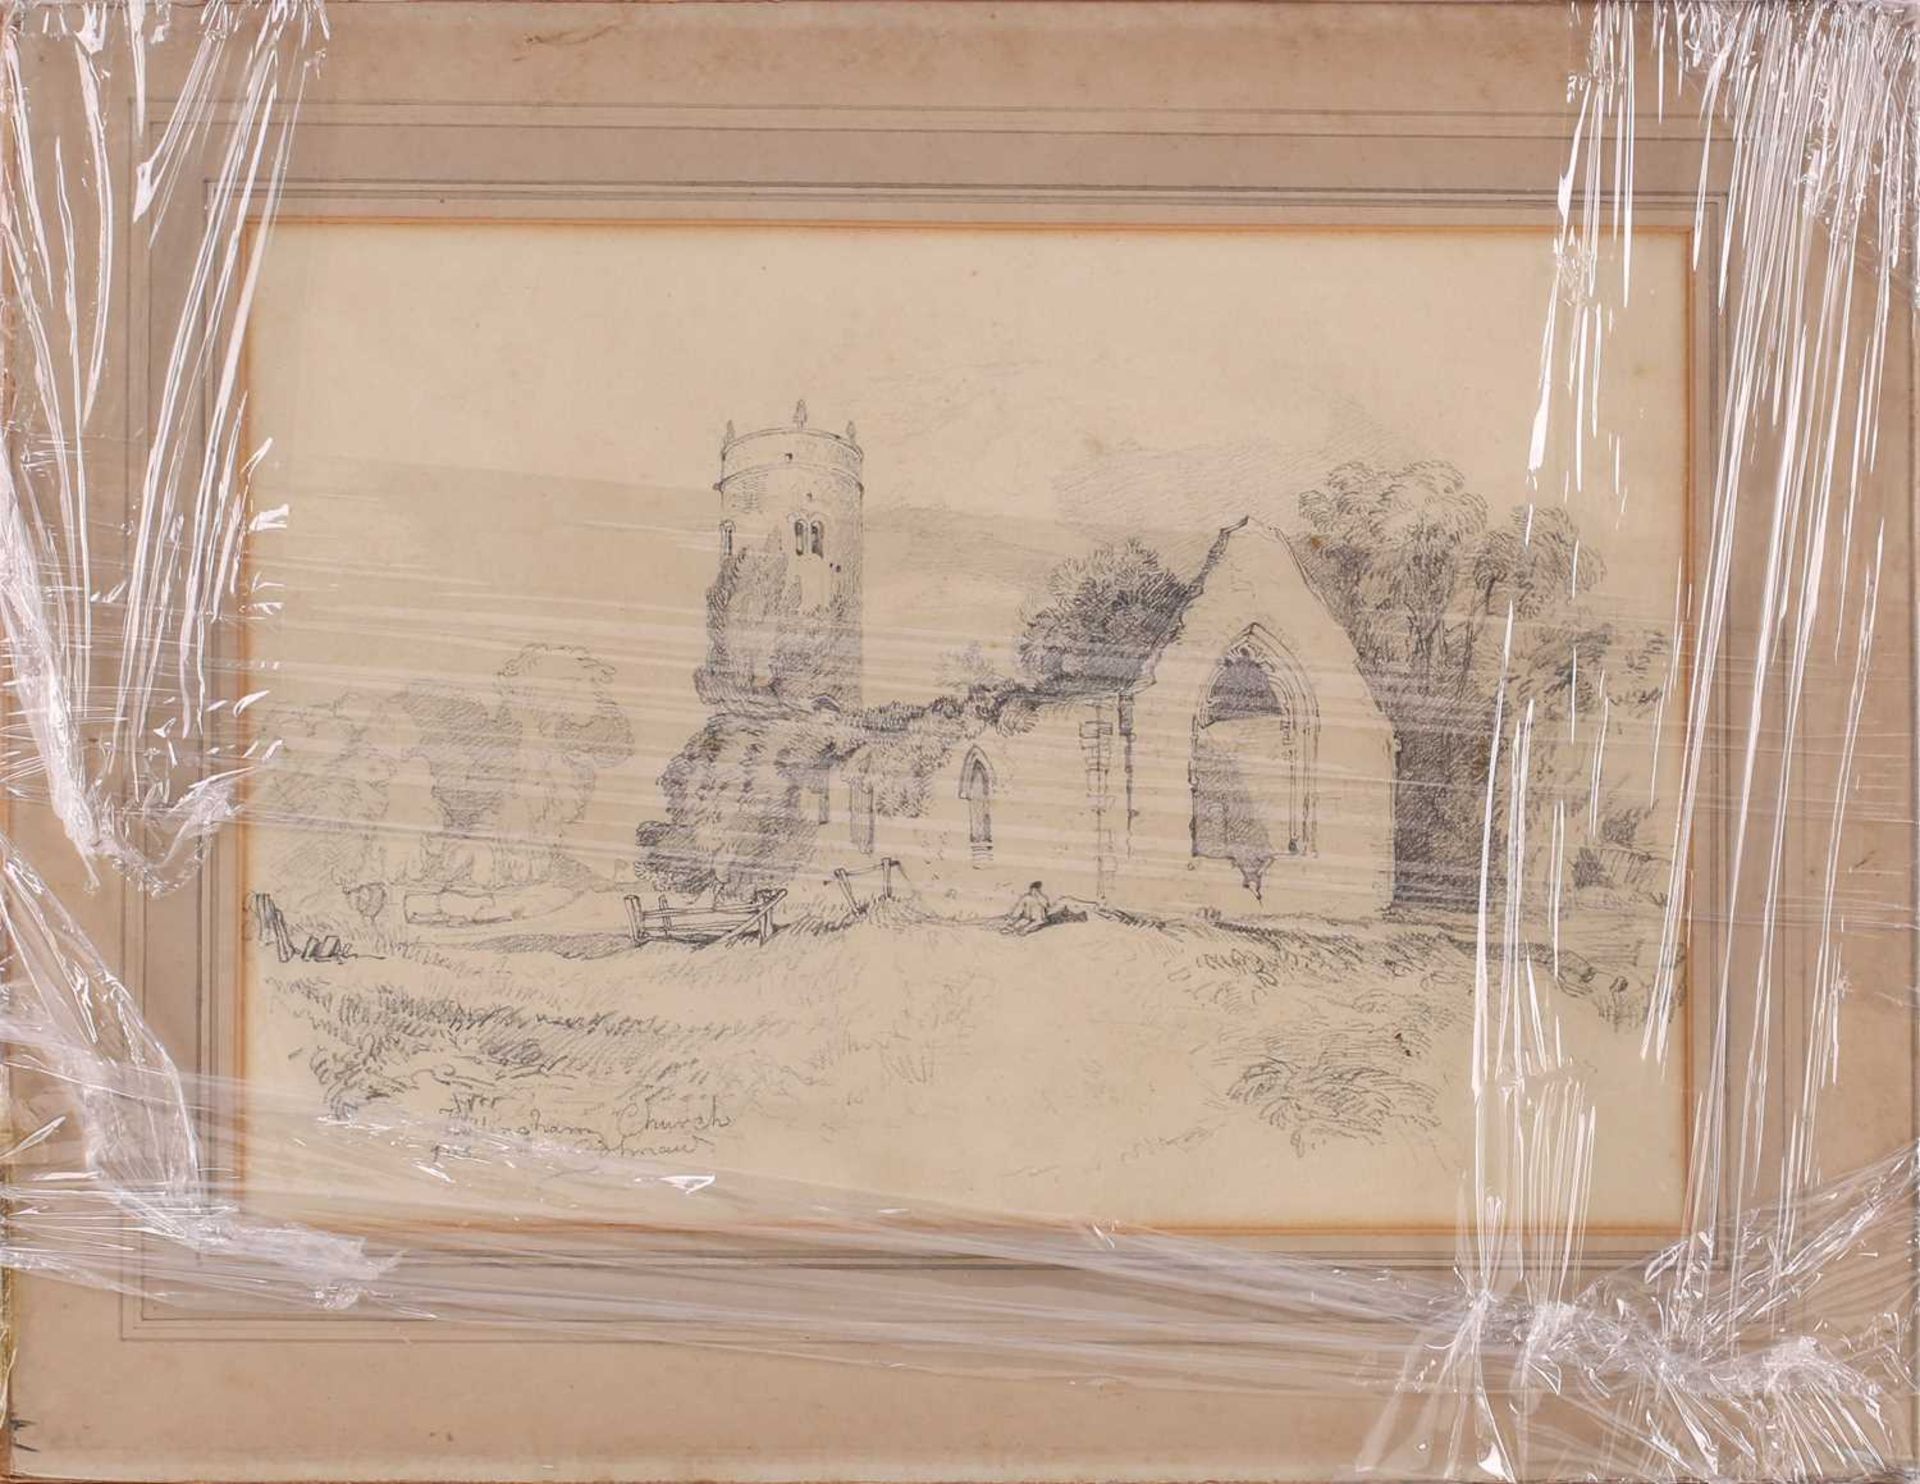 John Sell Cotman (1782 - 1842), 'Whitlingham Church', signed, titled and numbered 103, pencil